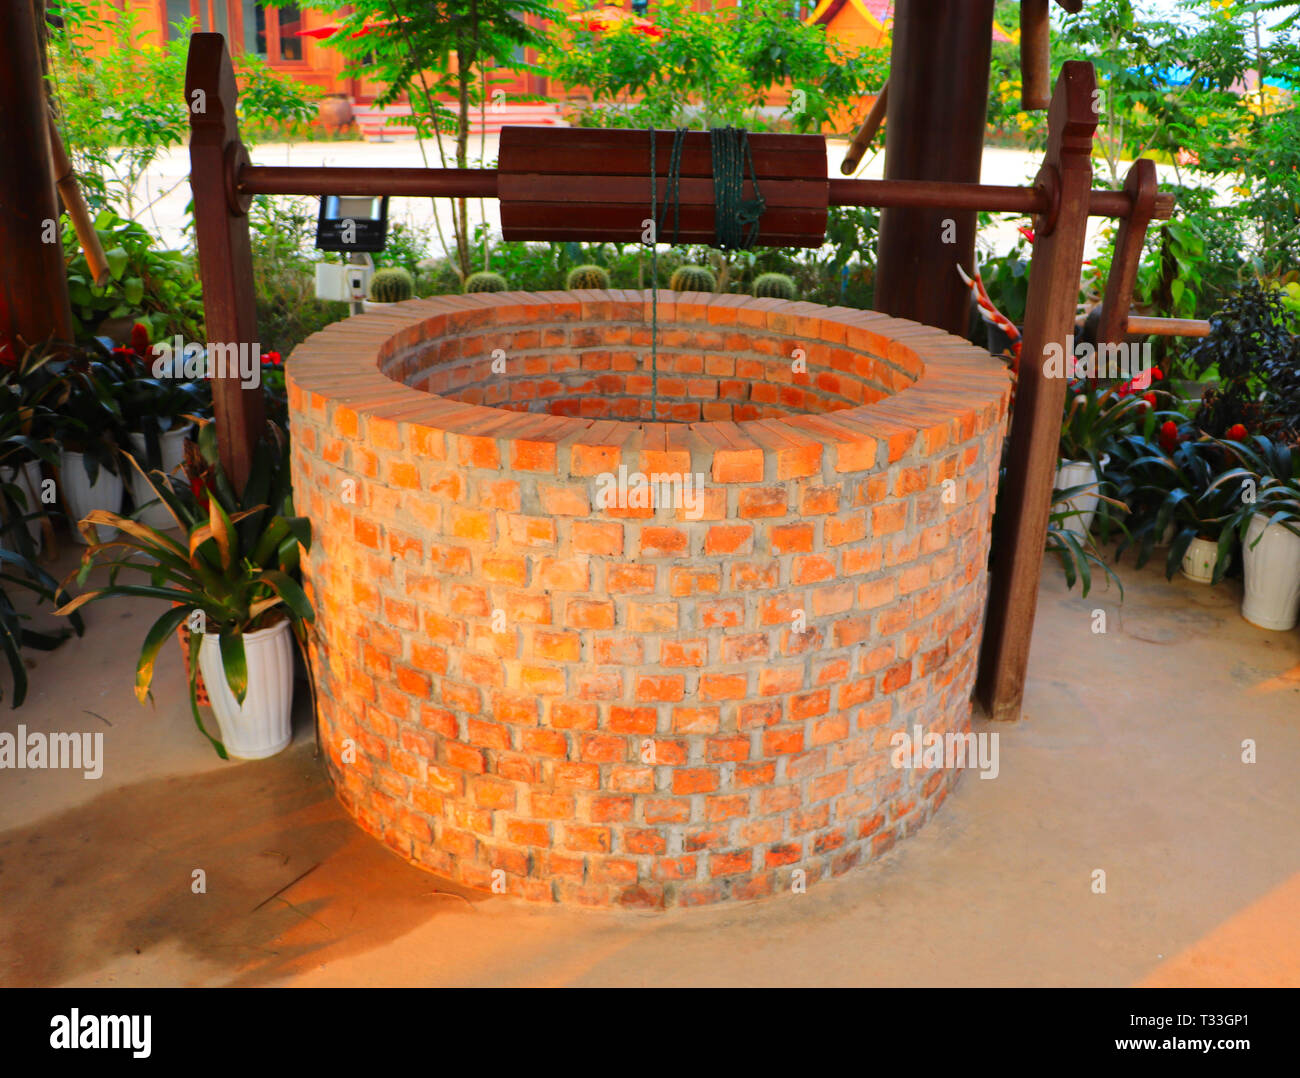 Dug water well is a structure created in the ground by digging to access groundwater in underground aquifers - cultural heritage preservation Stock Photo